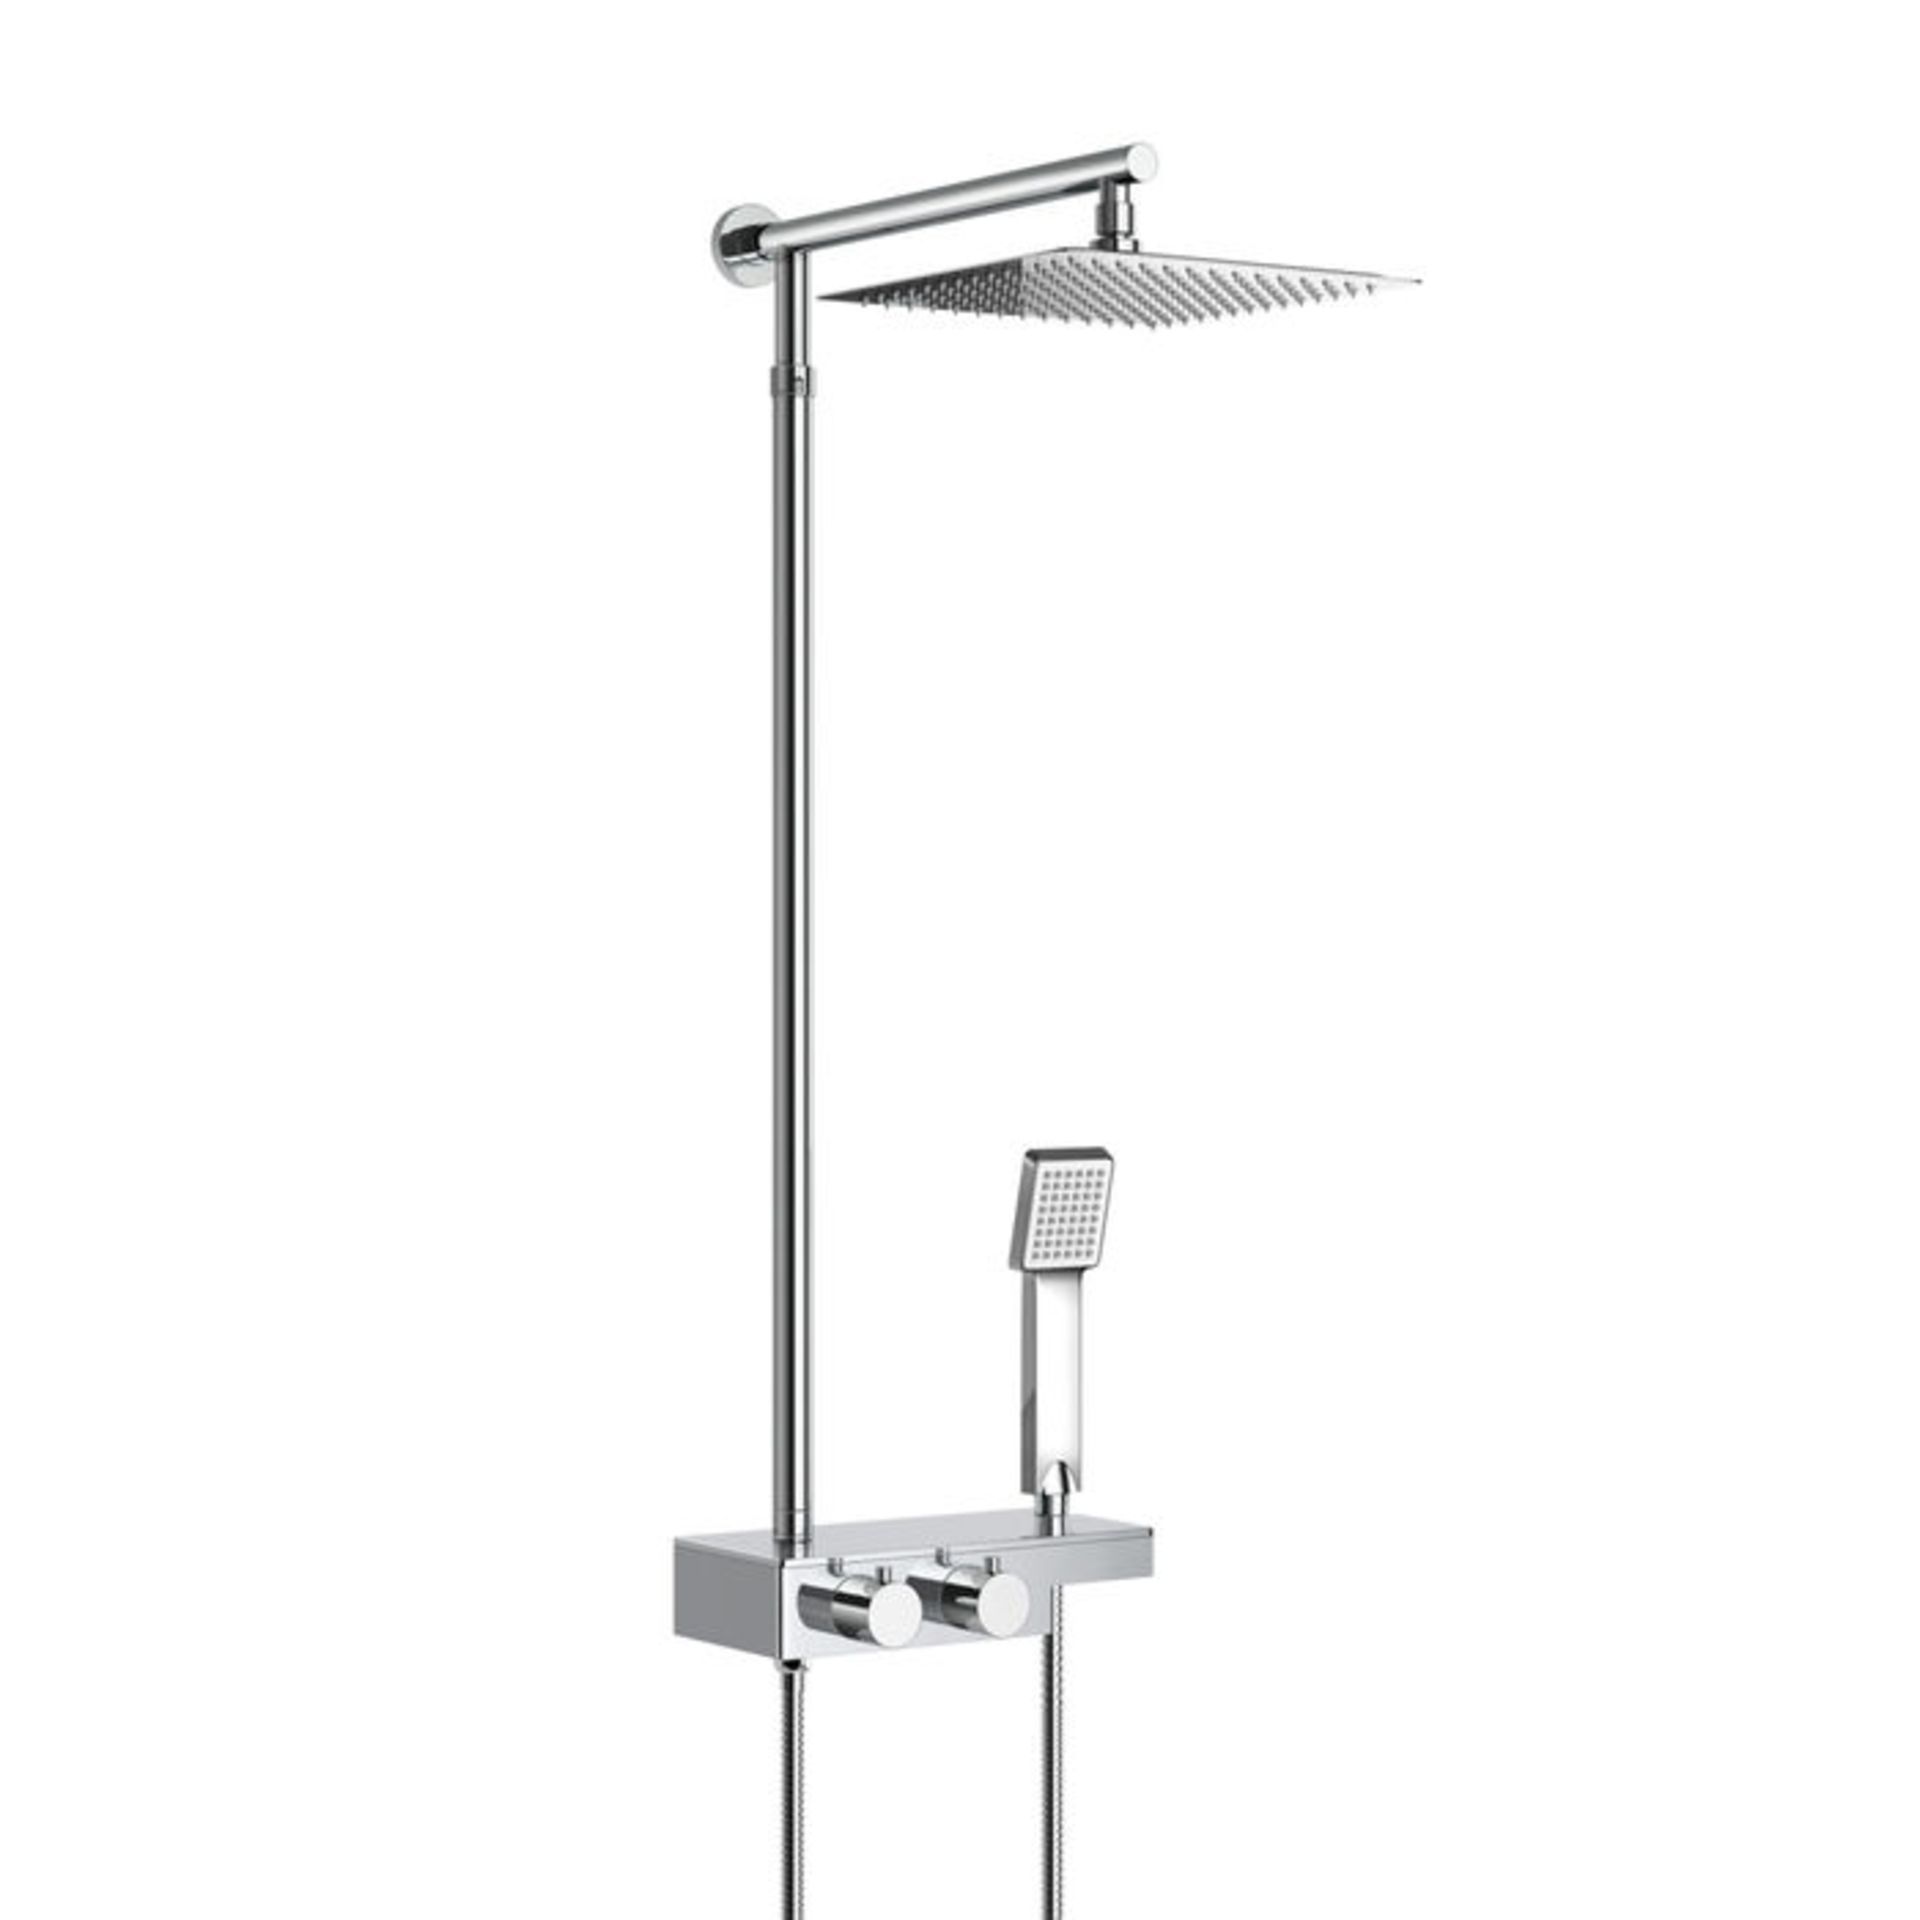 (OS36) Square Exposed Thermostatic Shower Shelf, Kit & Large Head. RRP £349.99. Style meets function - Image 2 of 4